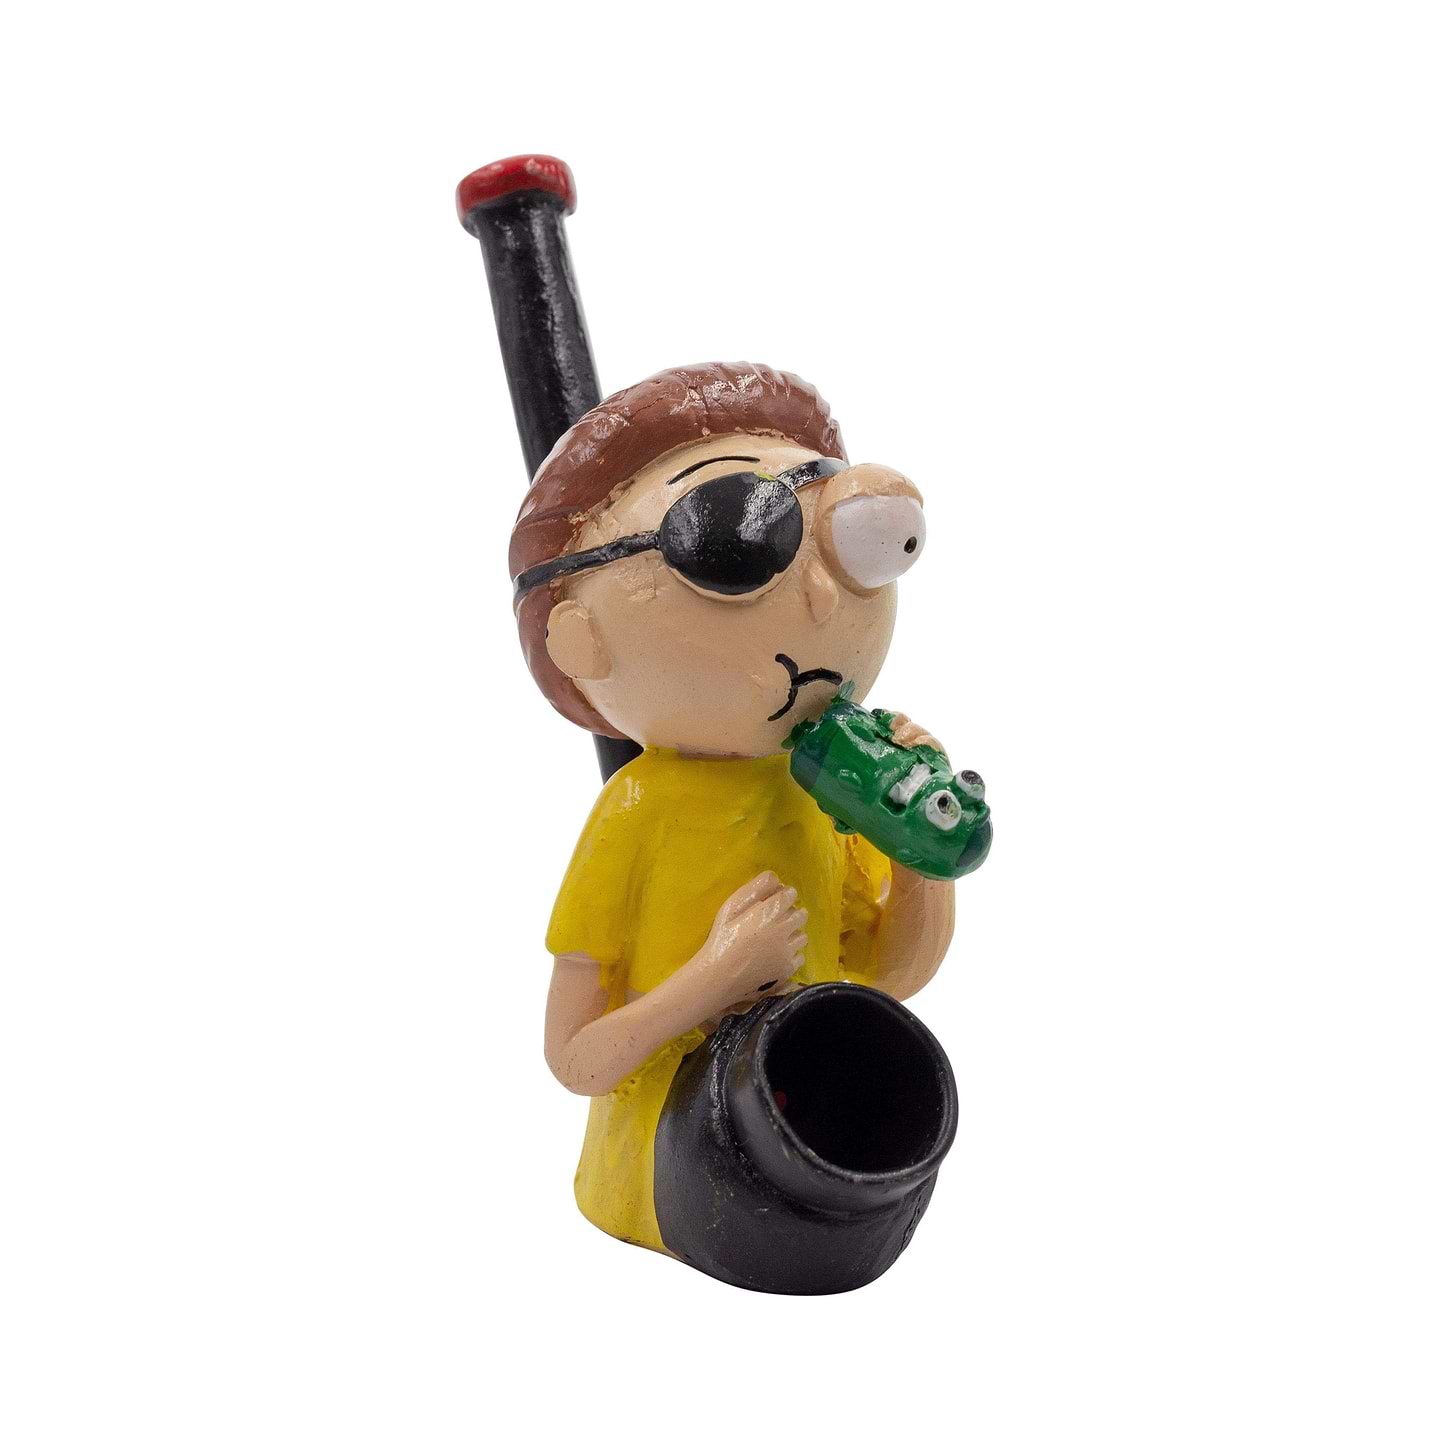 Cool hand-painted clay pipe smoking device figurine-like in Rick and morty - pirate morty design